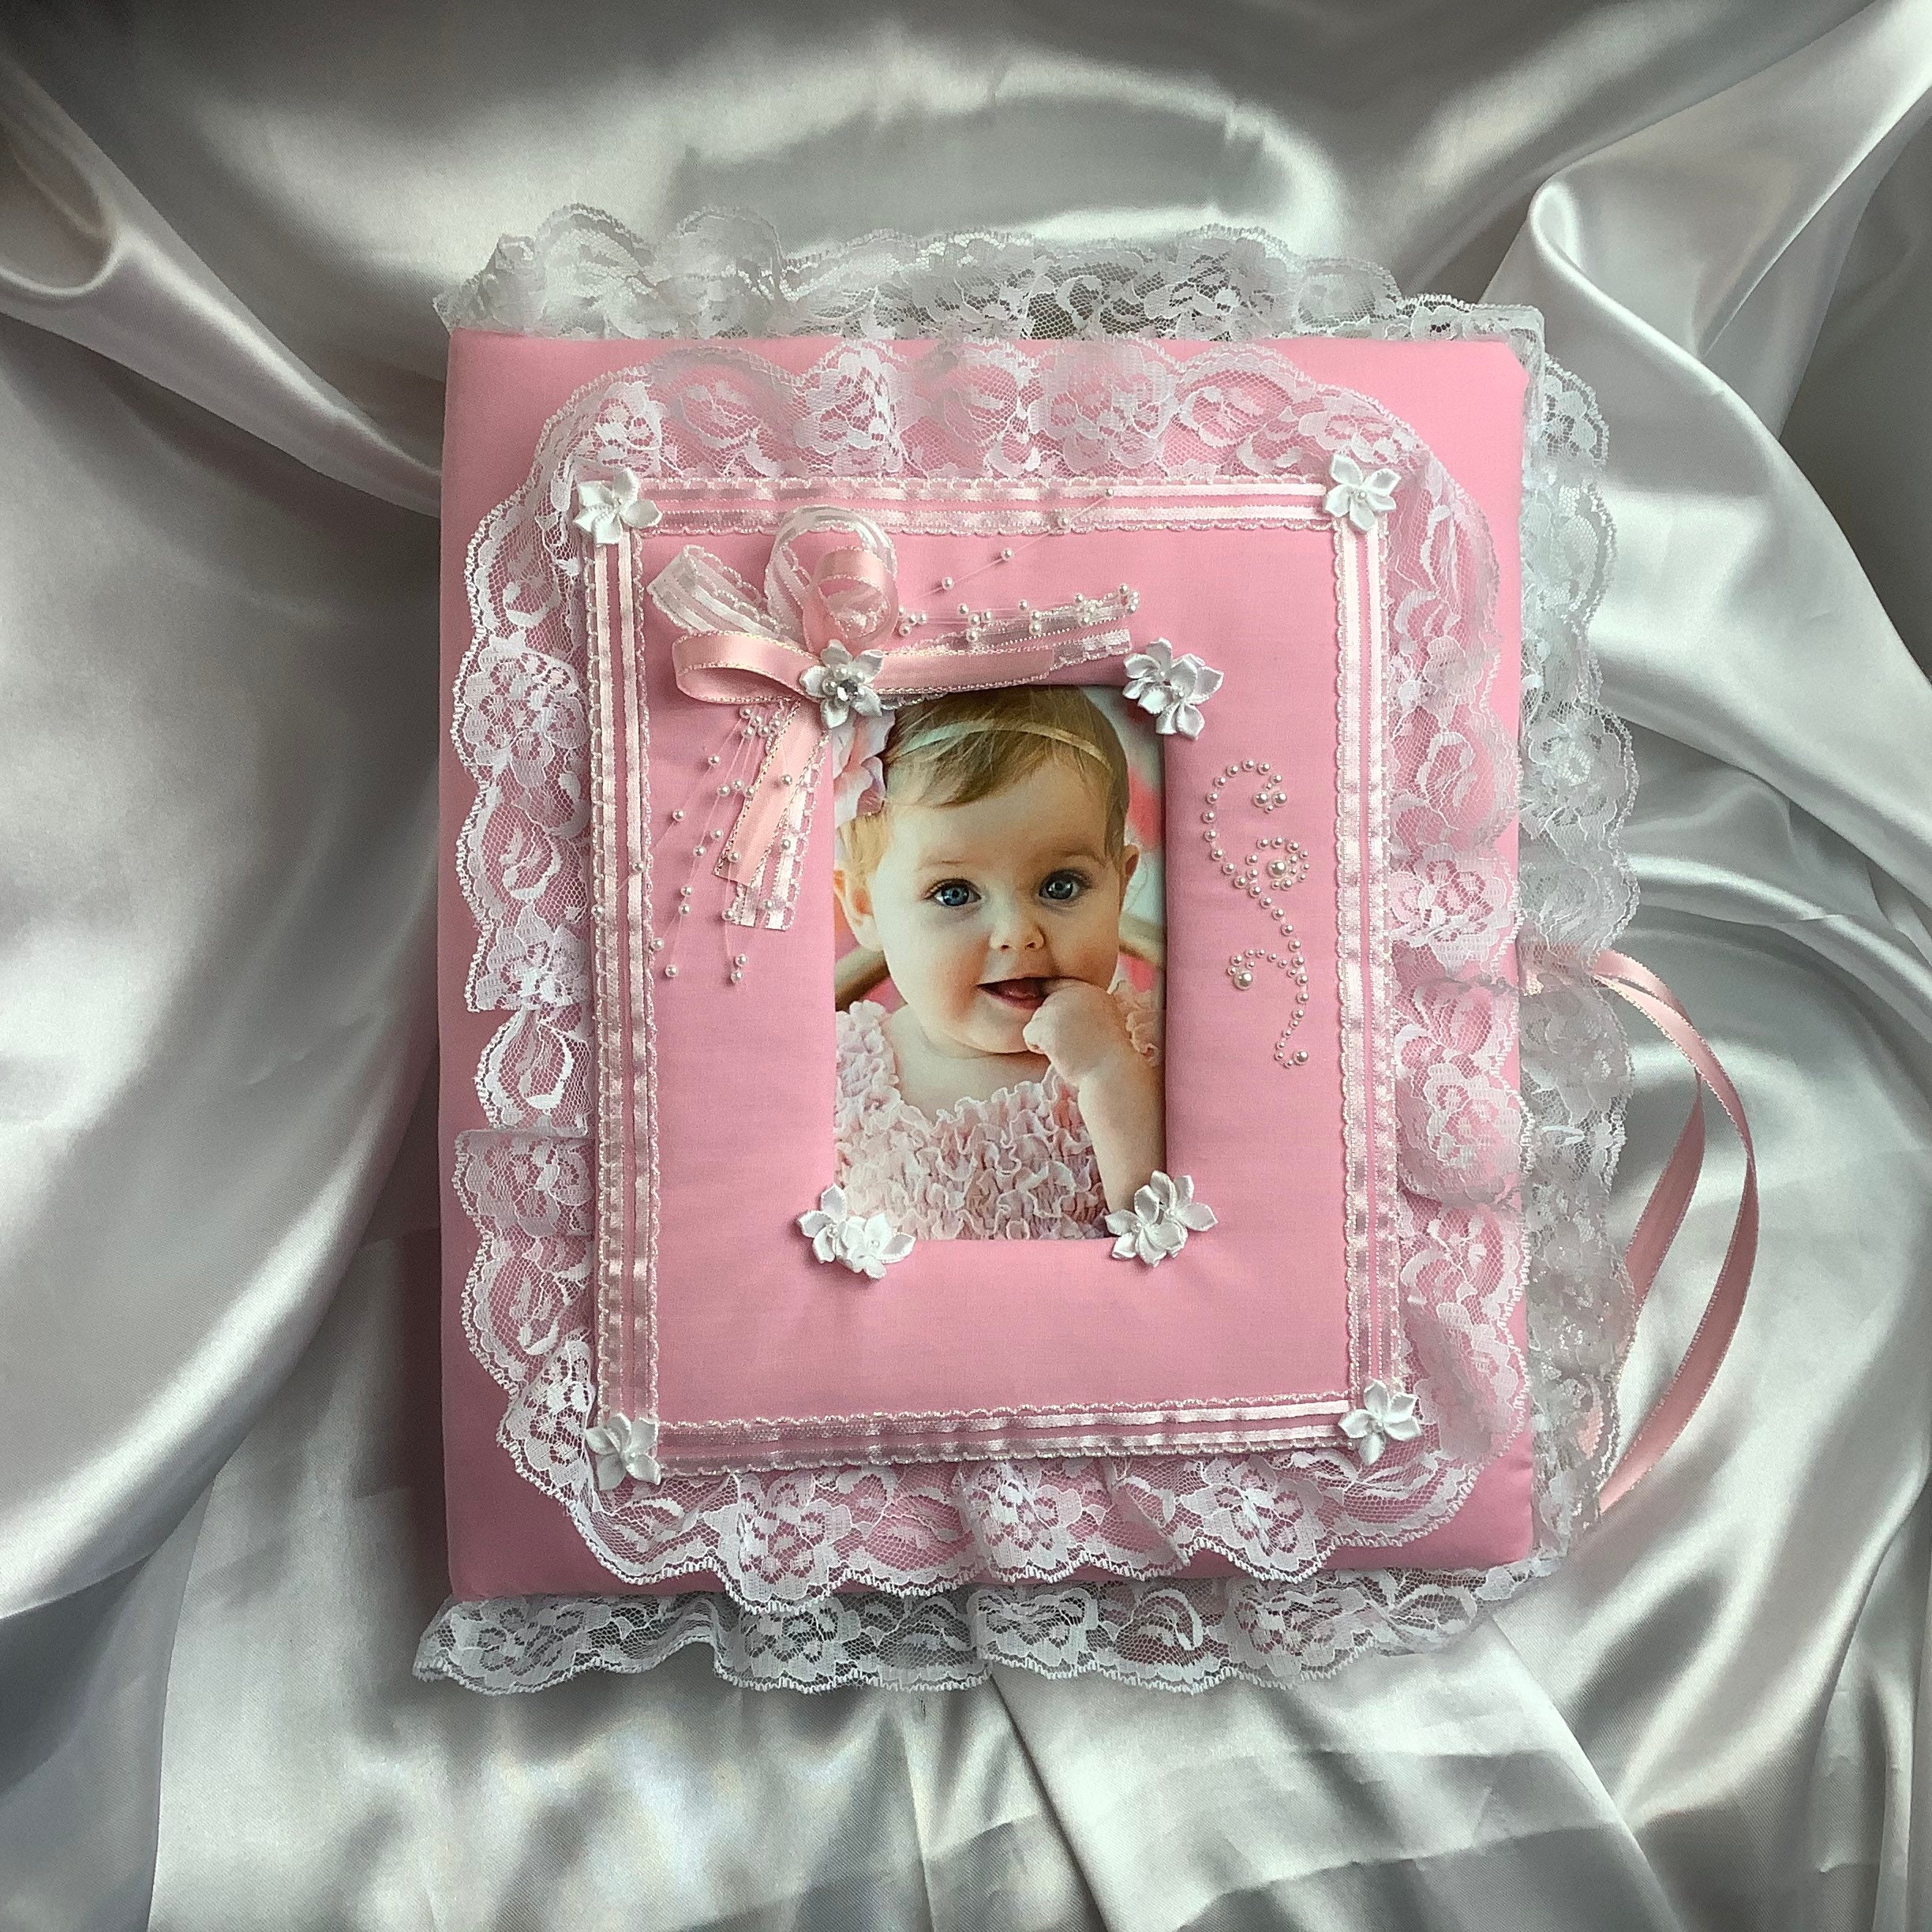 Baby pink scrapbook 12x12 album by Babyprints - Picture Frames, Photo  Albums, Personalized and Engraved Digital Photo Gifts - SendAFrame